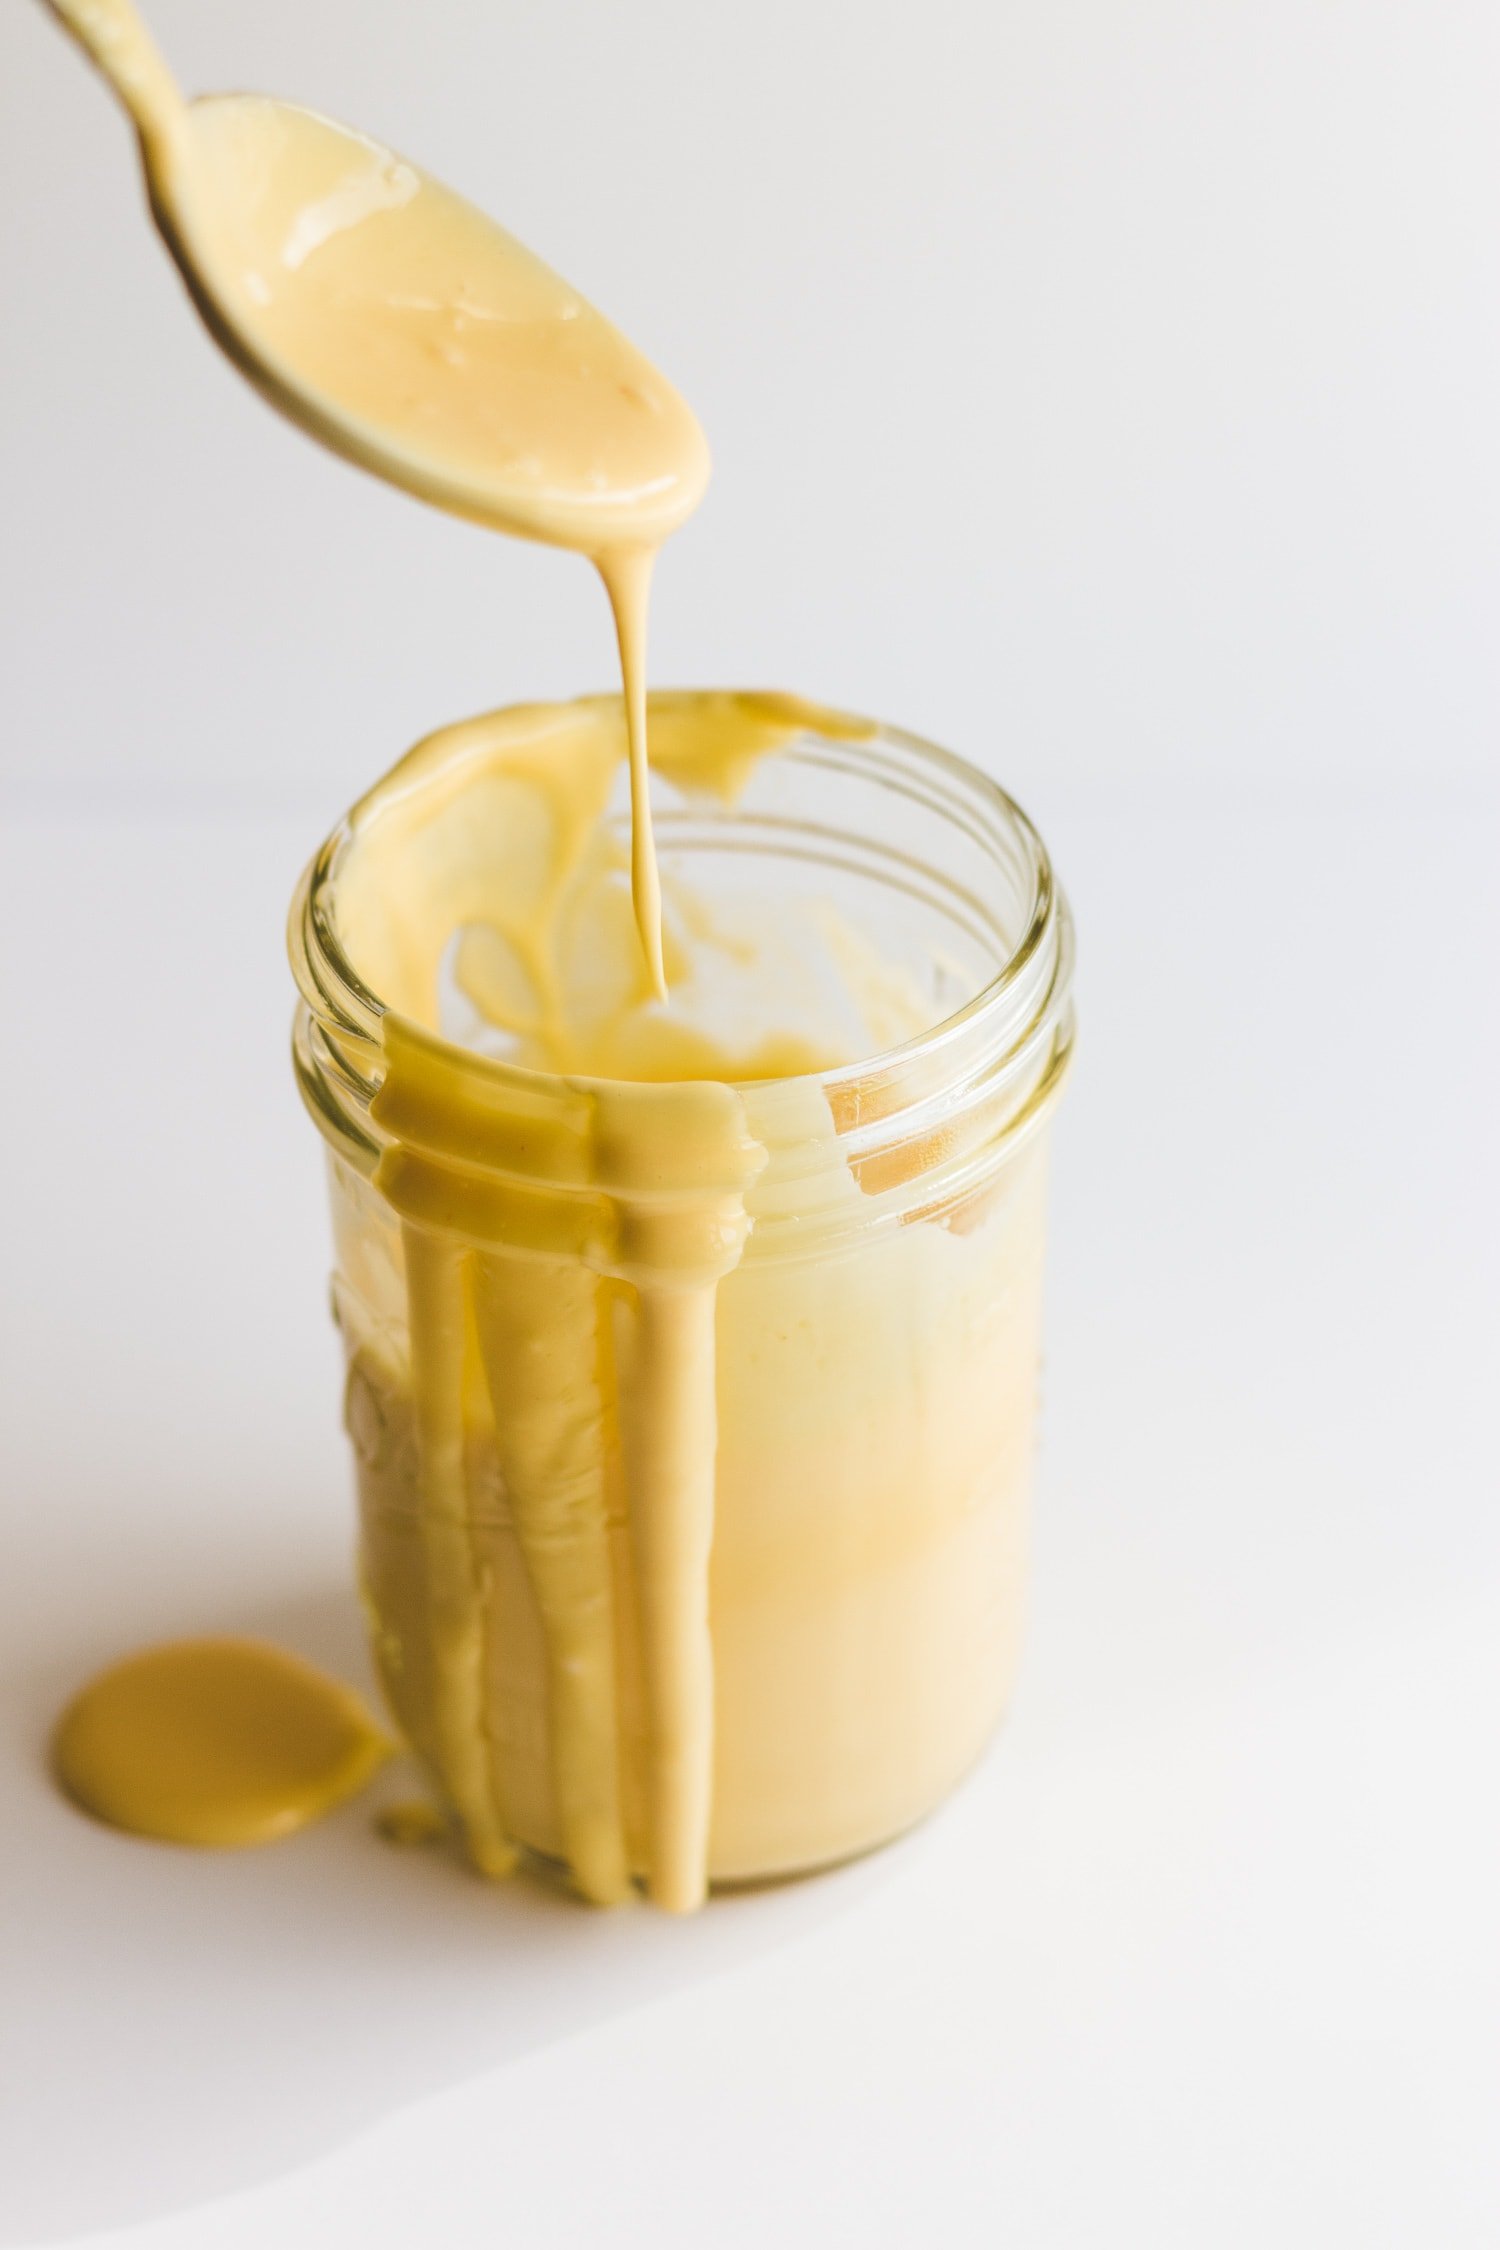 Hollandaise sauce dripping off of a spoon into a mason jar filled with sauce.